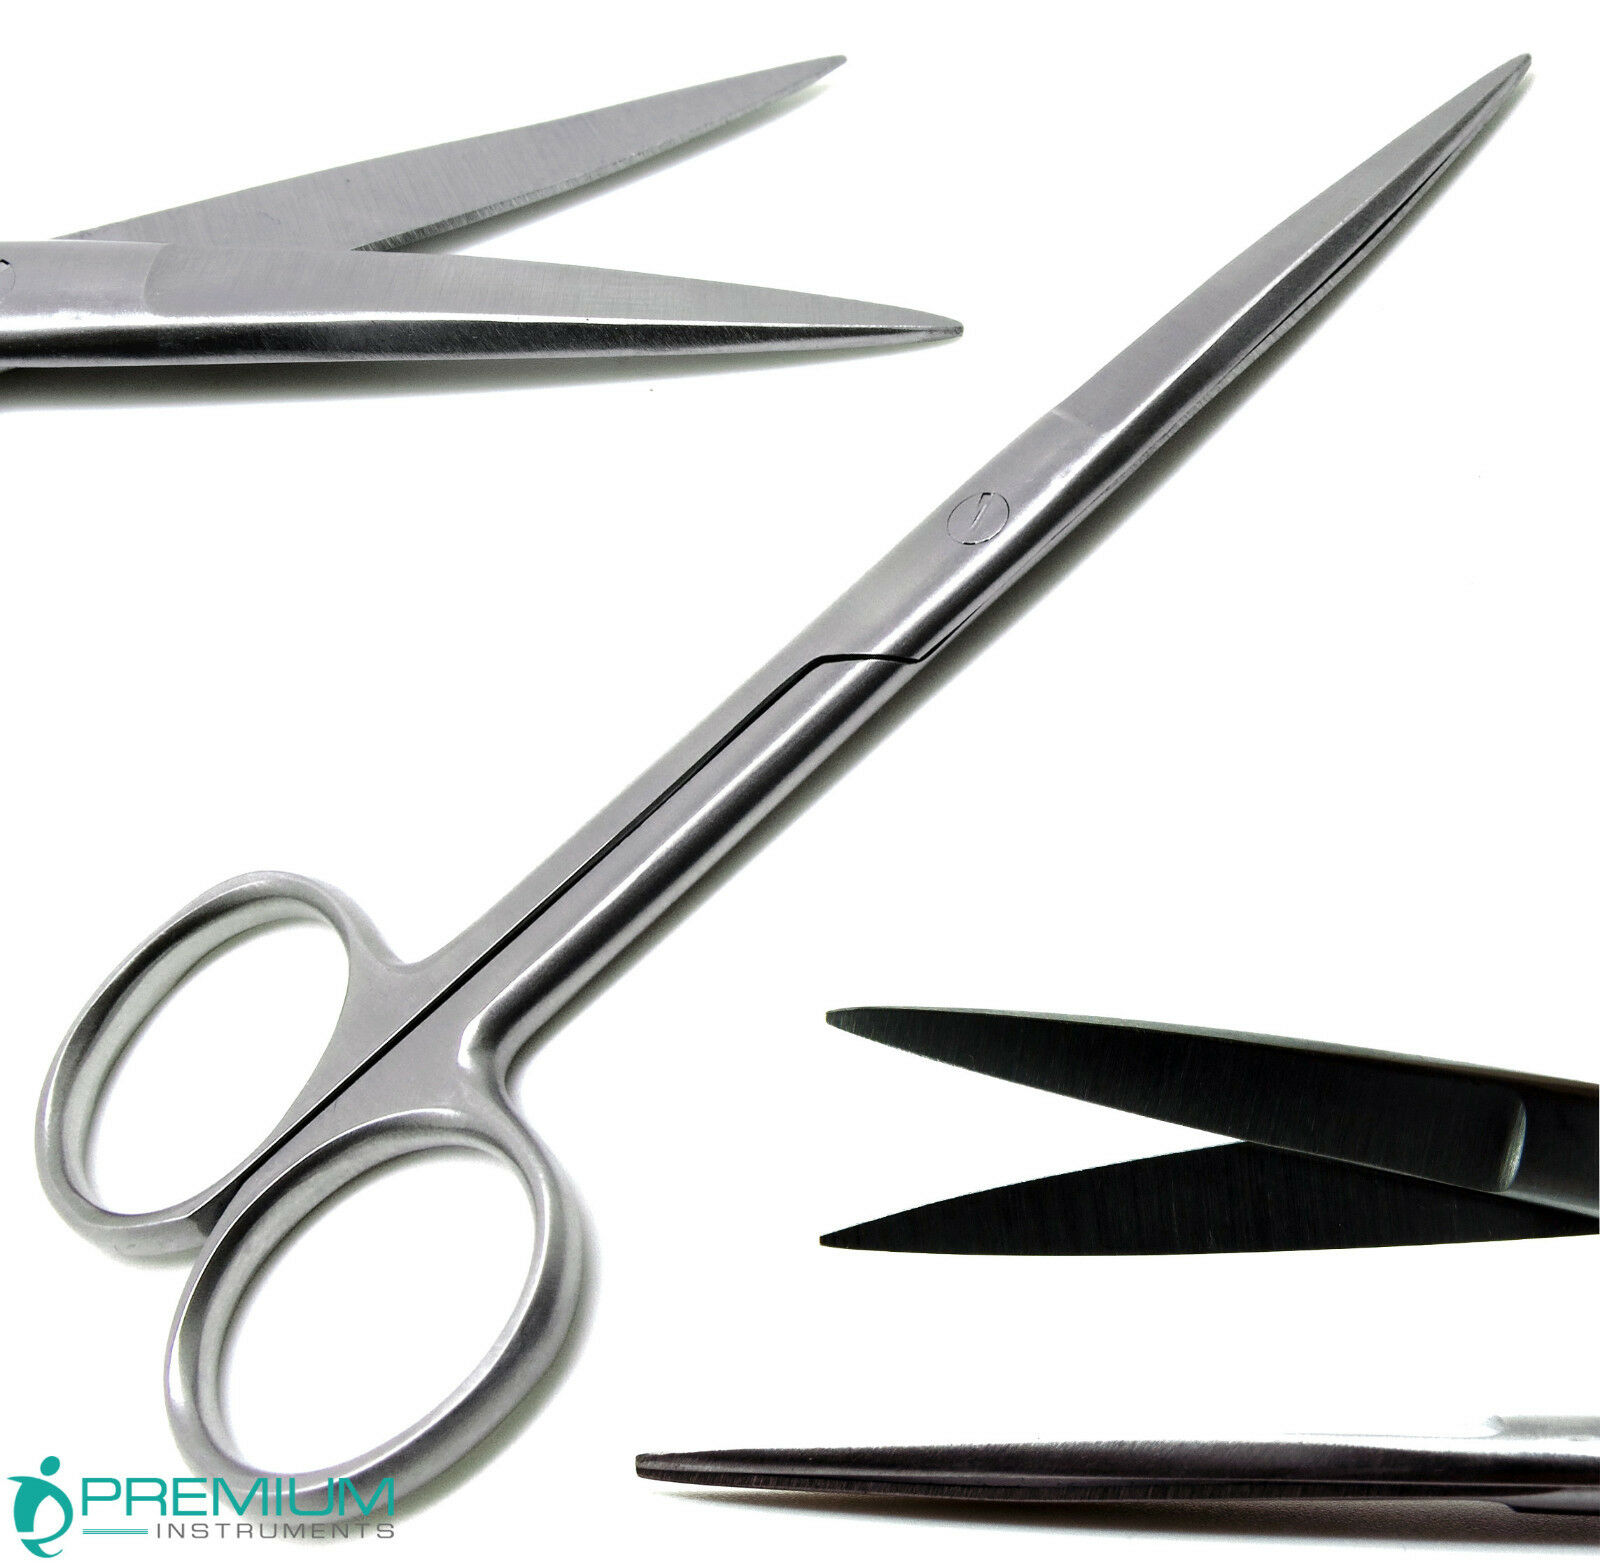 Medical Surgical Operating Dissecting Straight Scissors 4.5" Sharp/sharp Ends